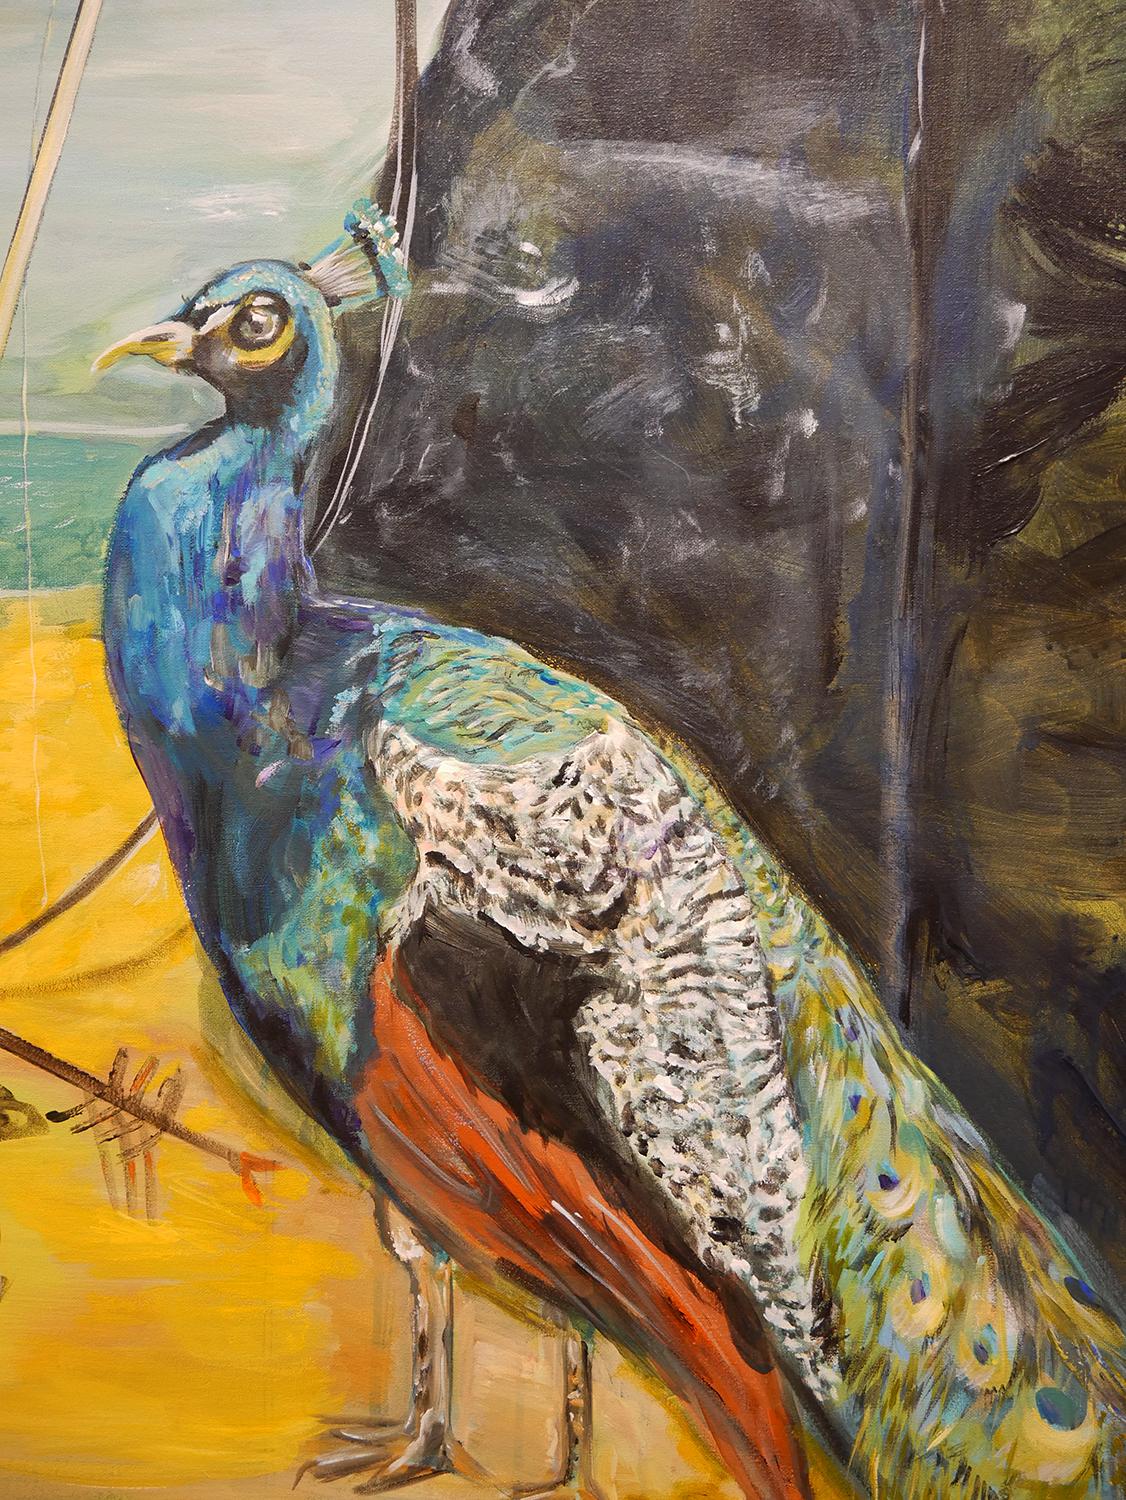 Contemporary Surrealist Landscape Painting of a Leopard & Peacock on the Beach 5